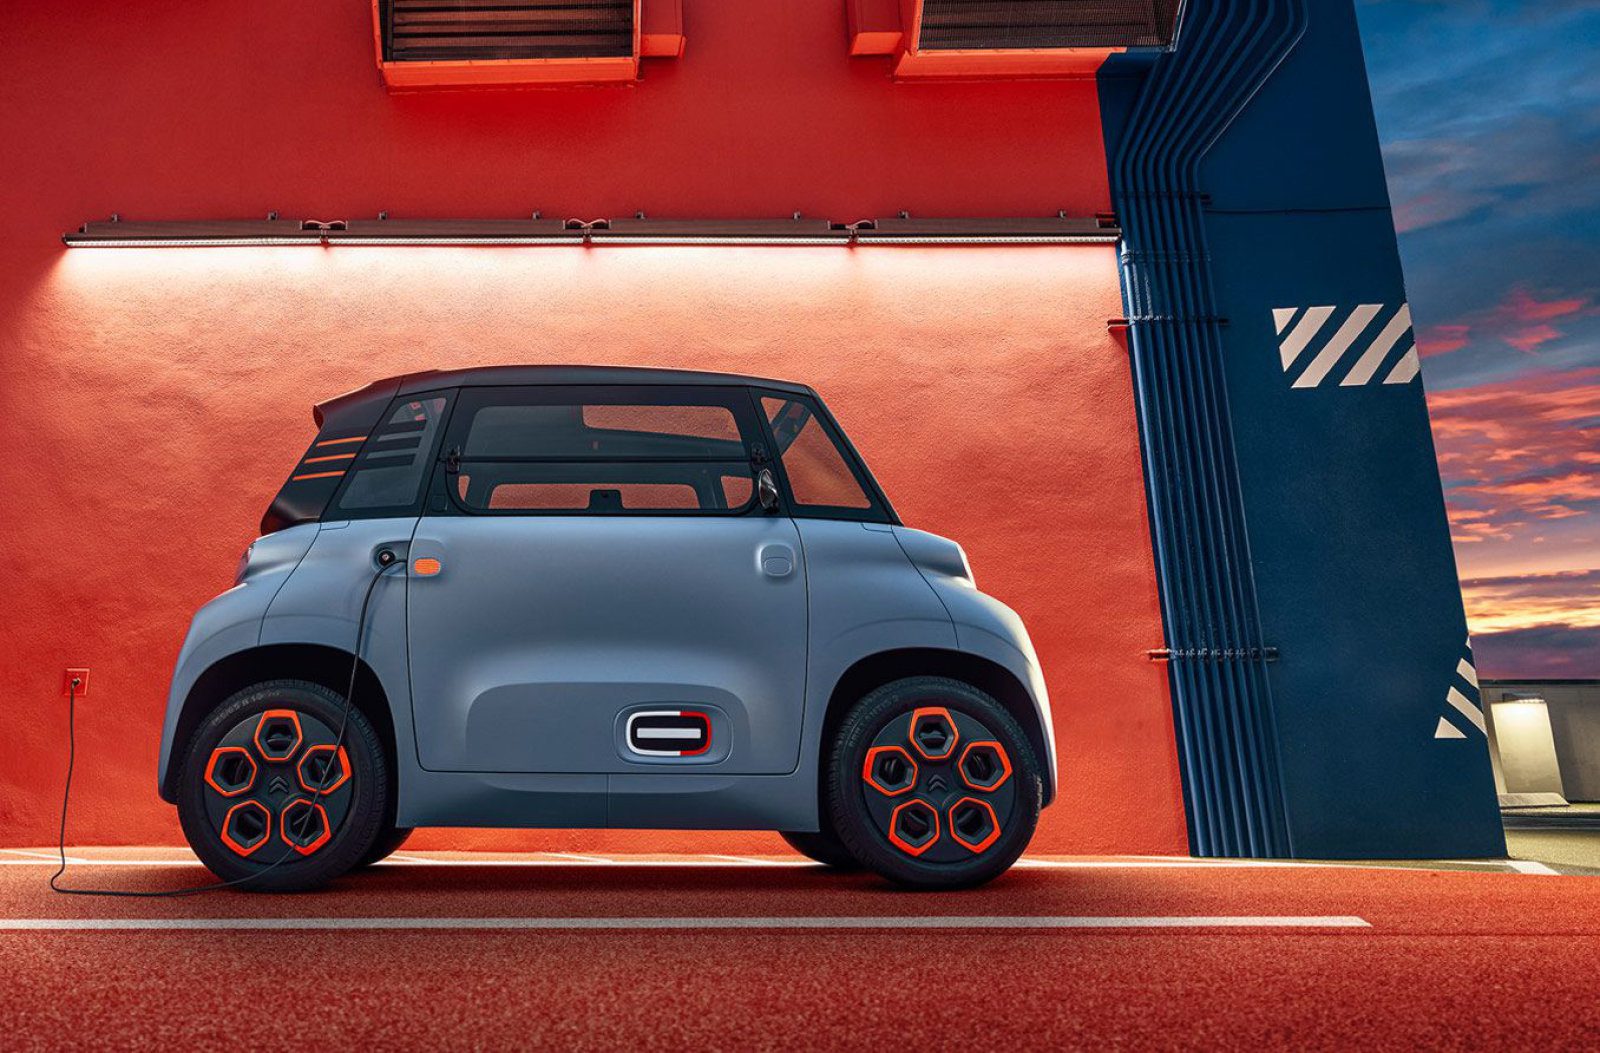 The Two-Seater Citroën Ami EV Costs $22 Per Month